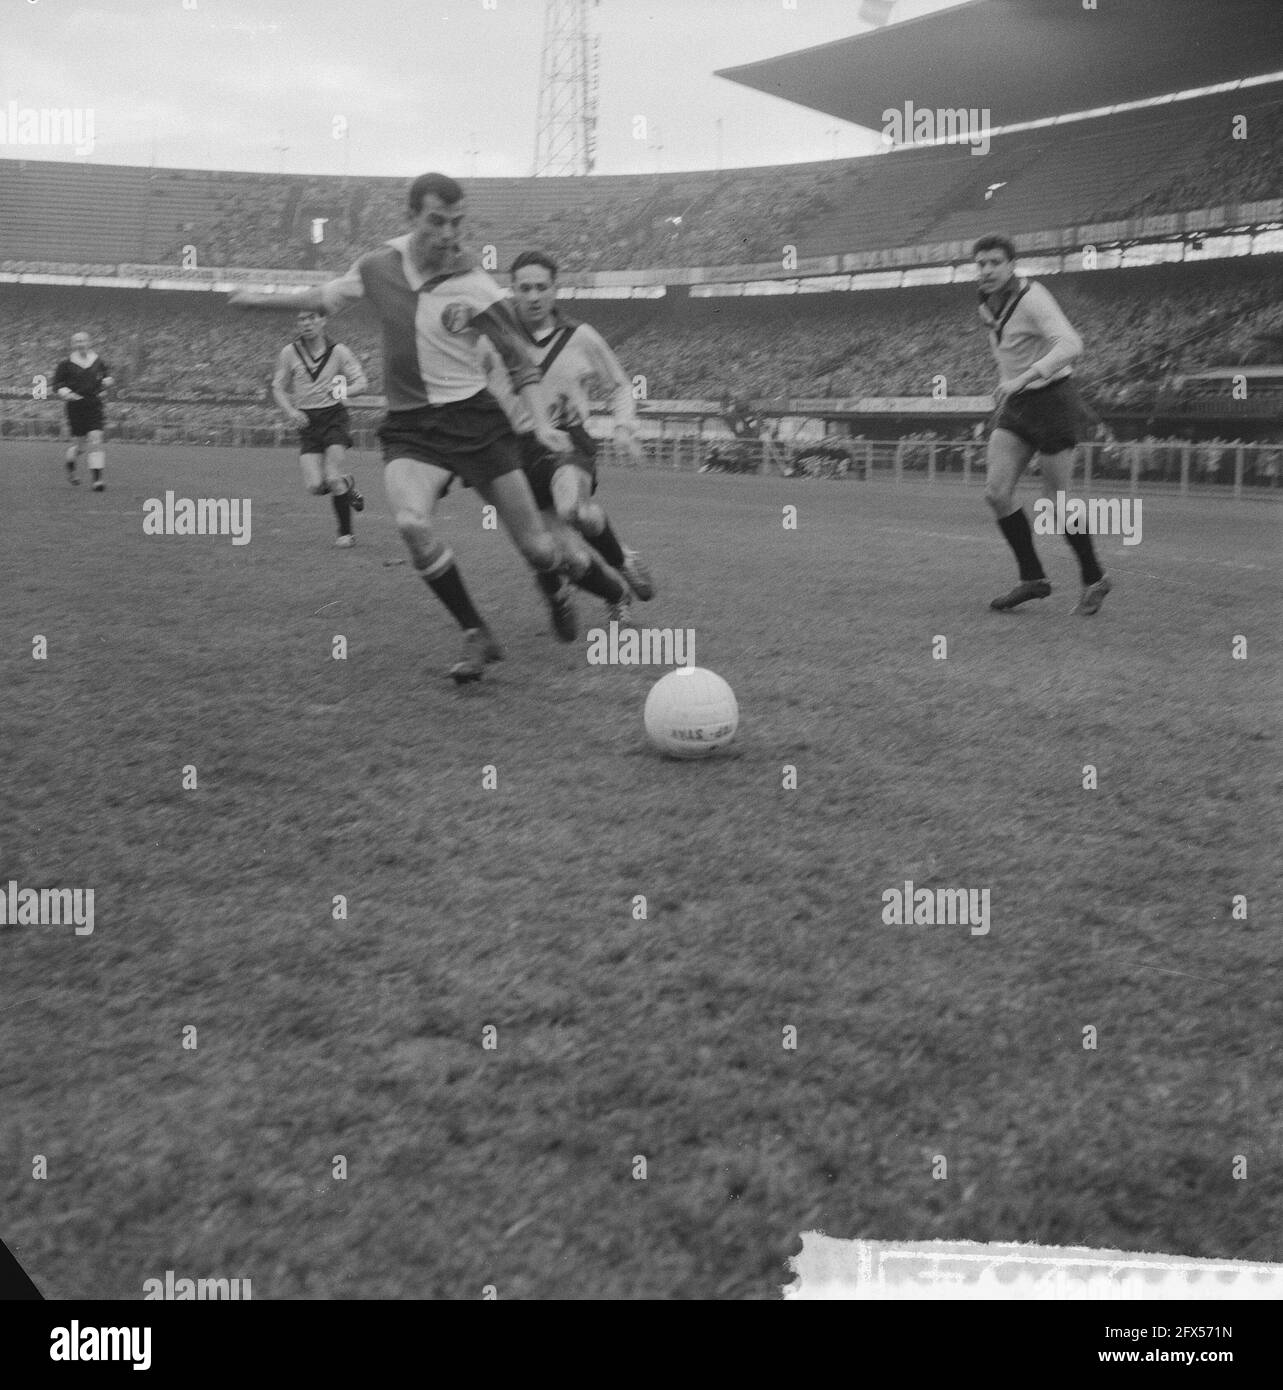 Feyenoord vs VVV 3-3, Coen Moulijn in action, 8 January 1961, sports, soccer, The Netherlands, 20th century press agency photo, news to remember, documentary, historic photography 1945-1990, visual stories, human history of the Twentieth Century, capturing moments in time Stock Photo